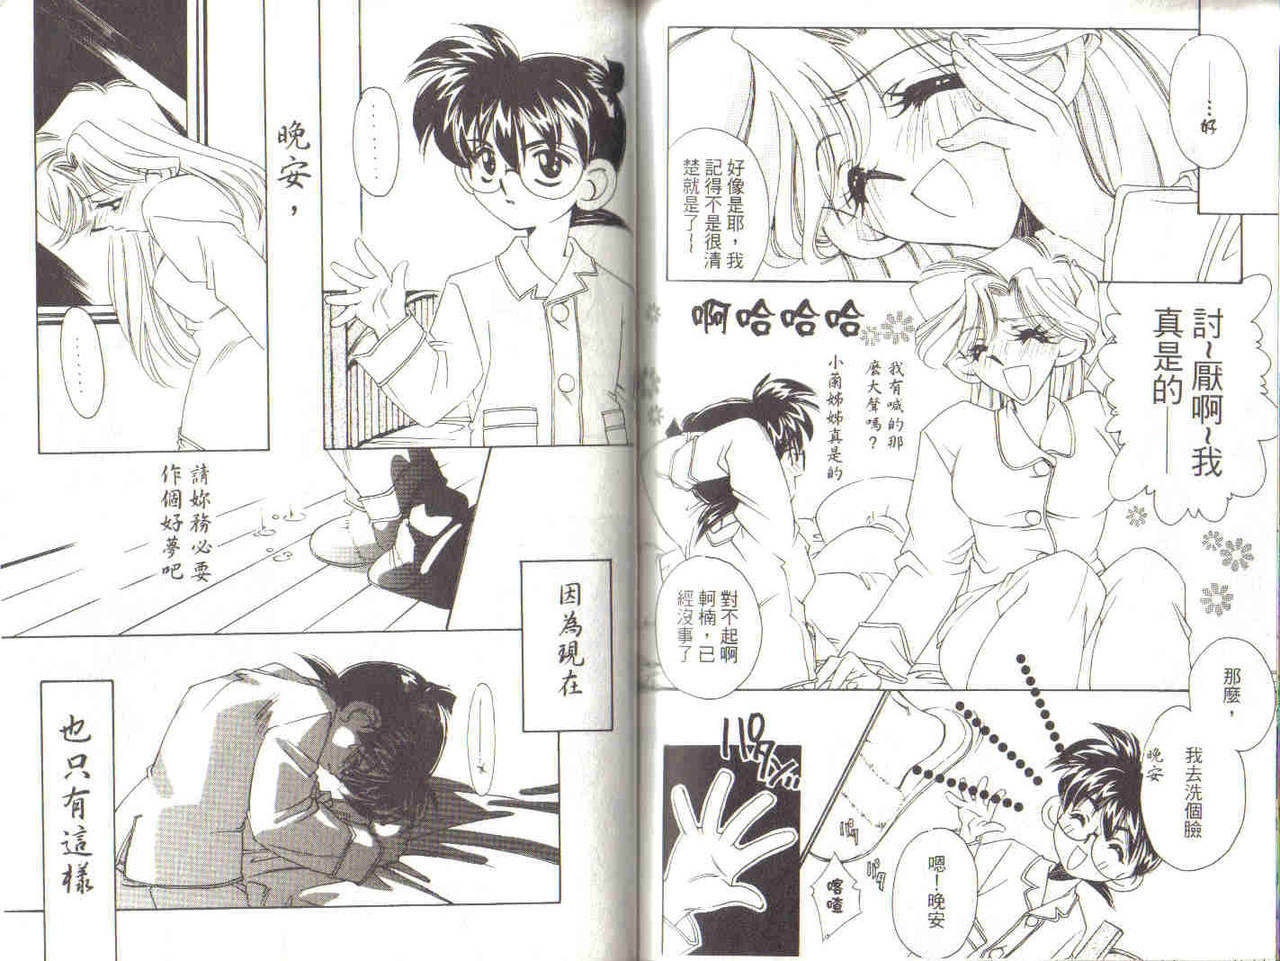 [Ooya Nako] Detective Assistant Vol. 3 (Detective Conan) [Chinese] page 80 full